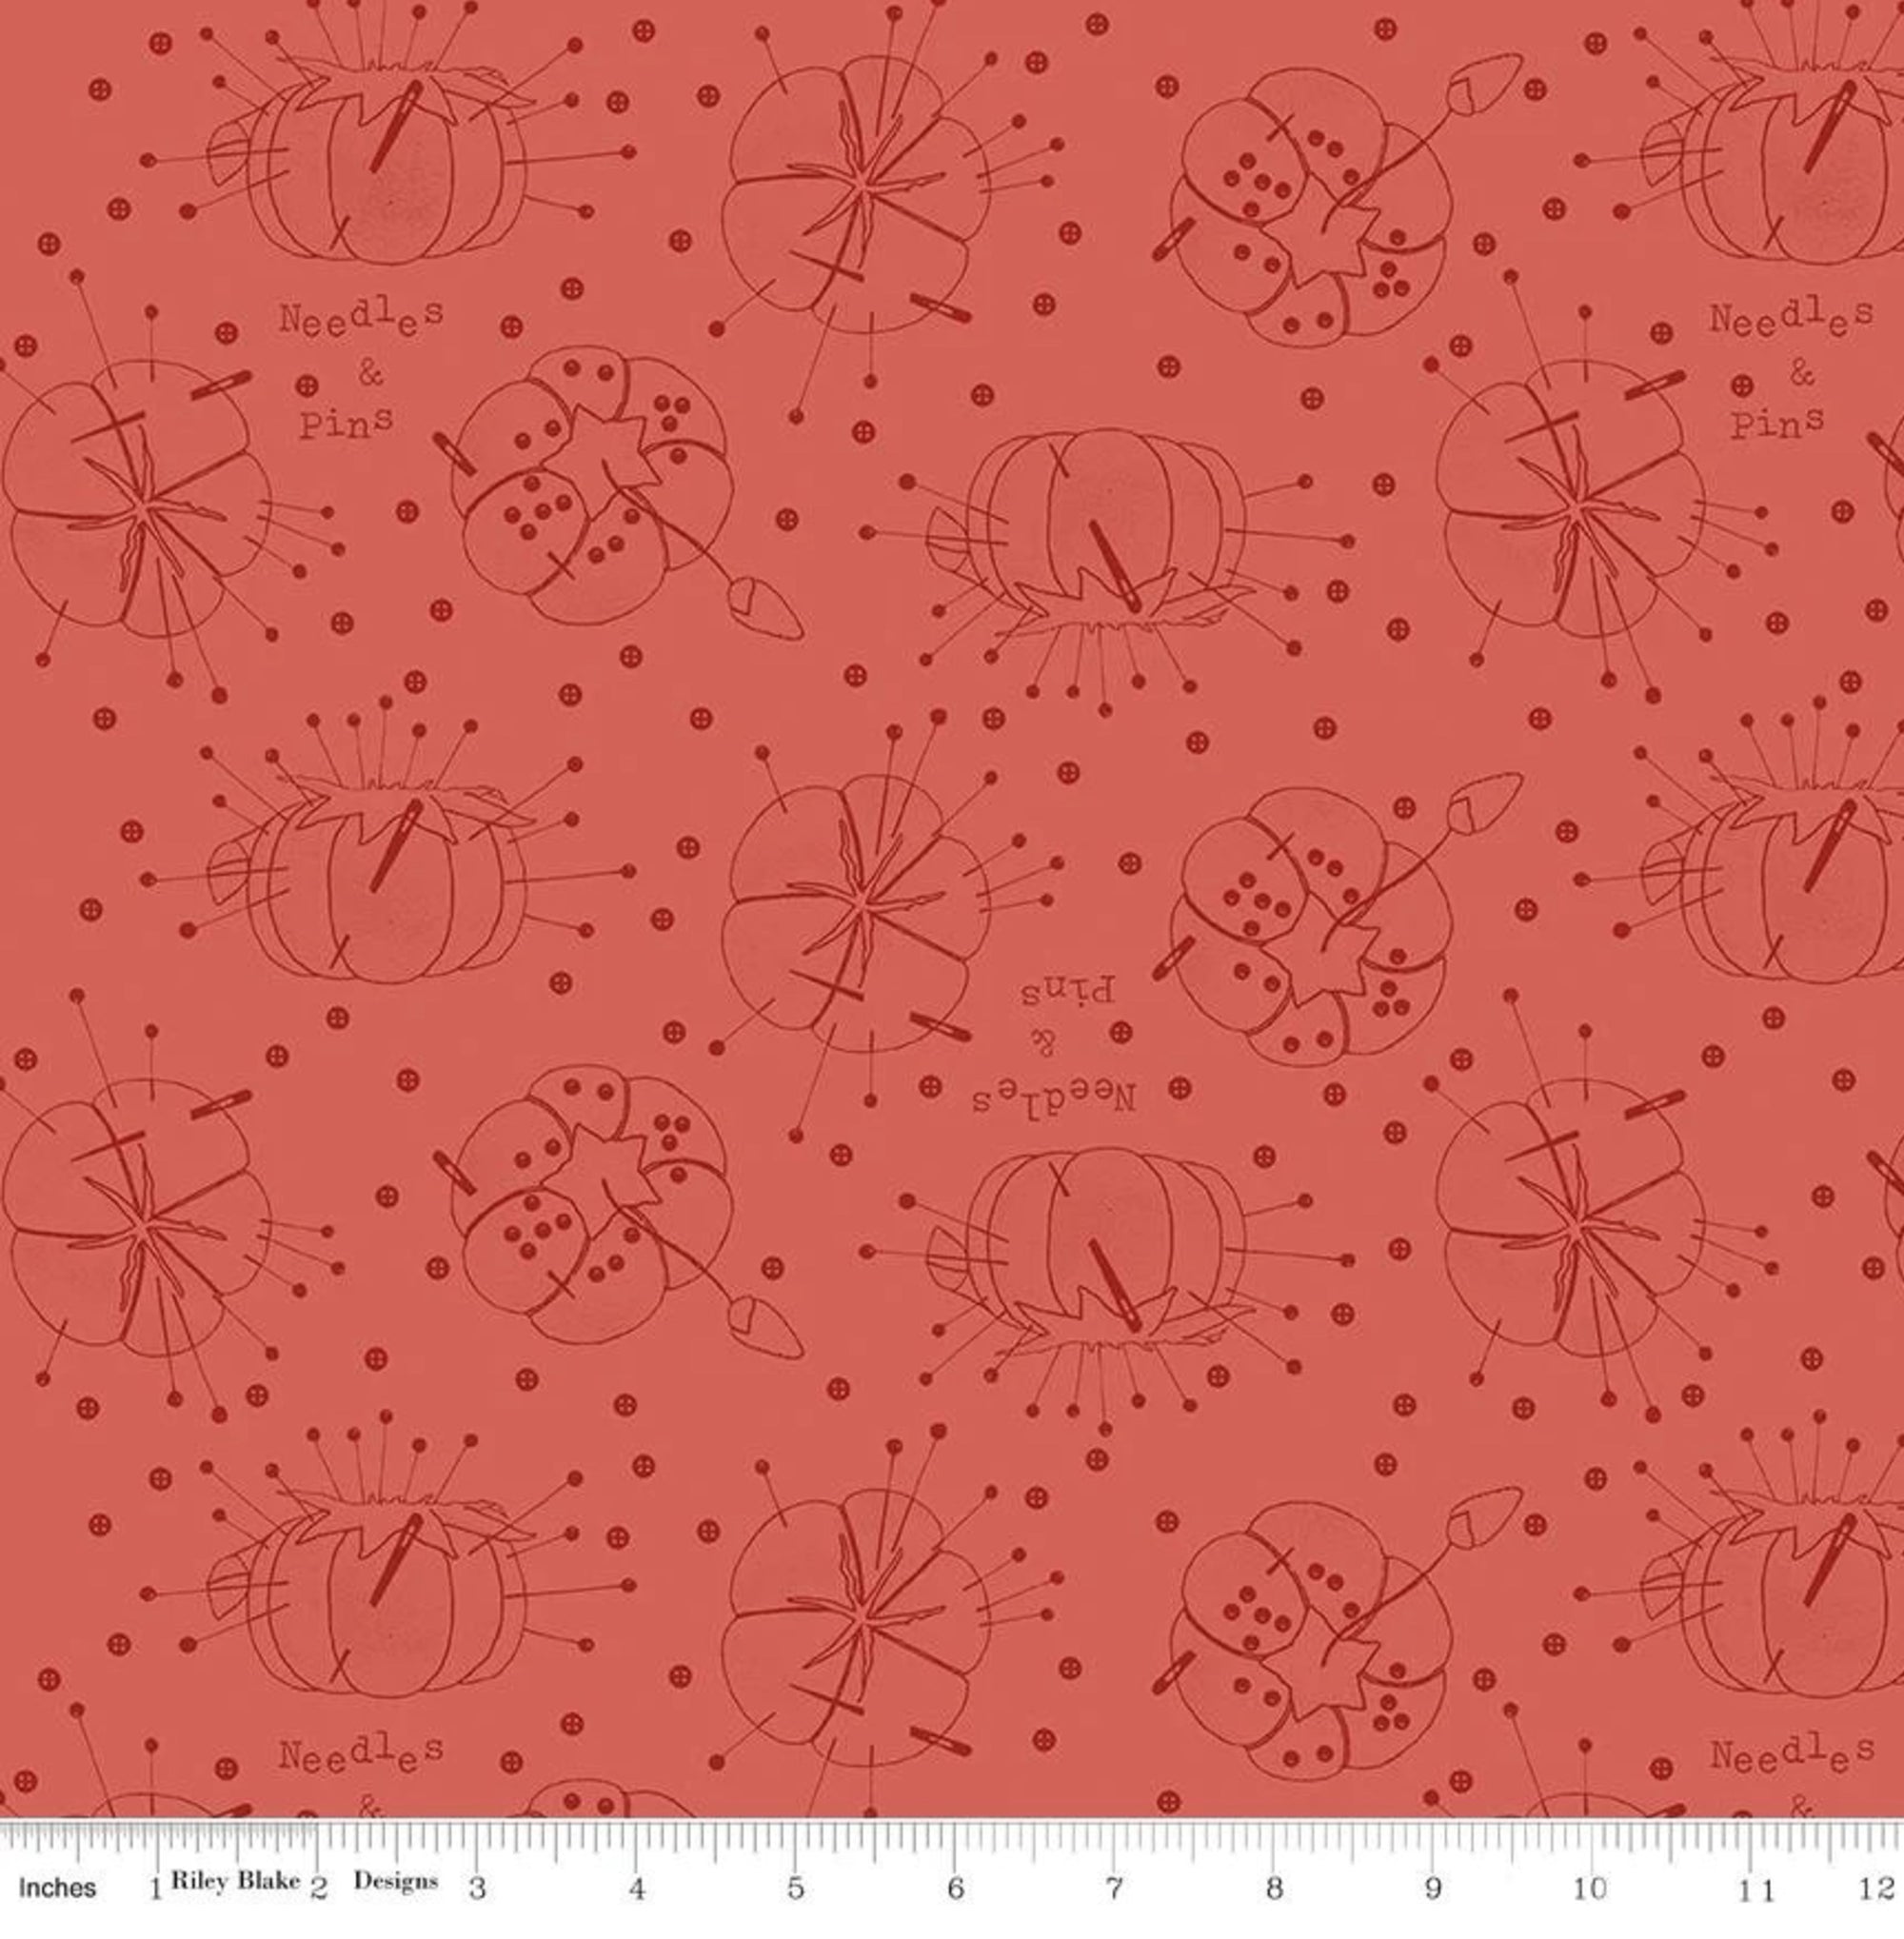 Riley Blake Designs - Best of She Who Sews - Pincushion Linework Red